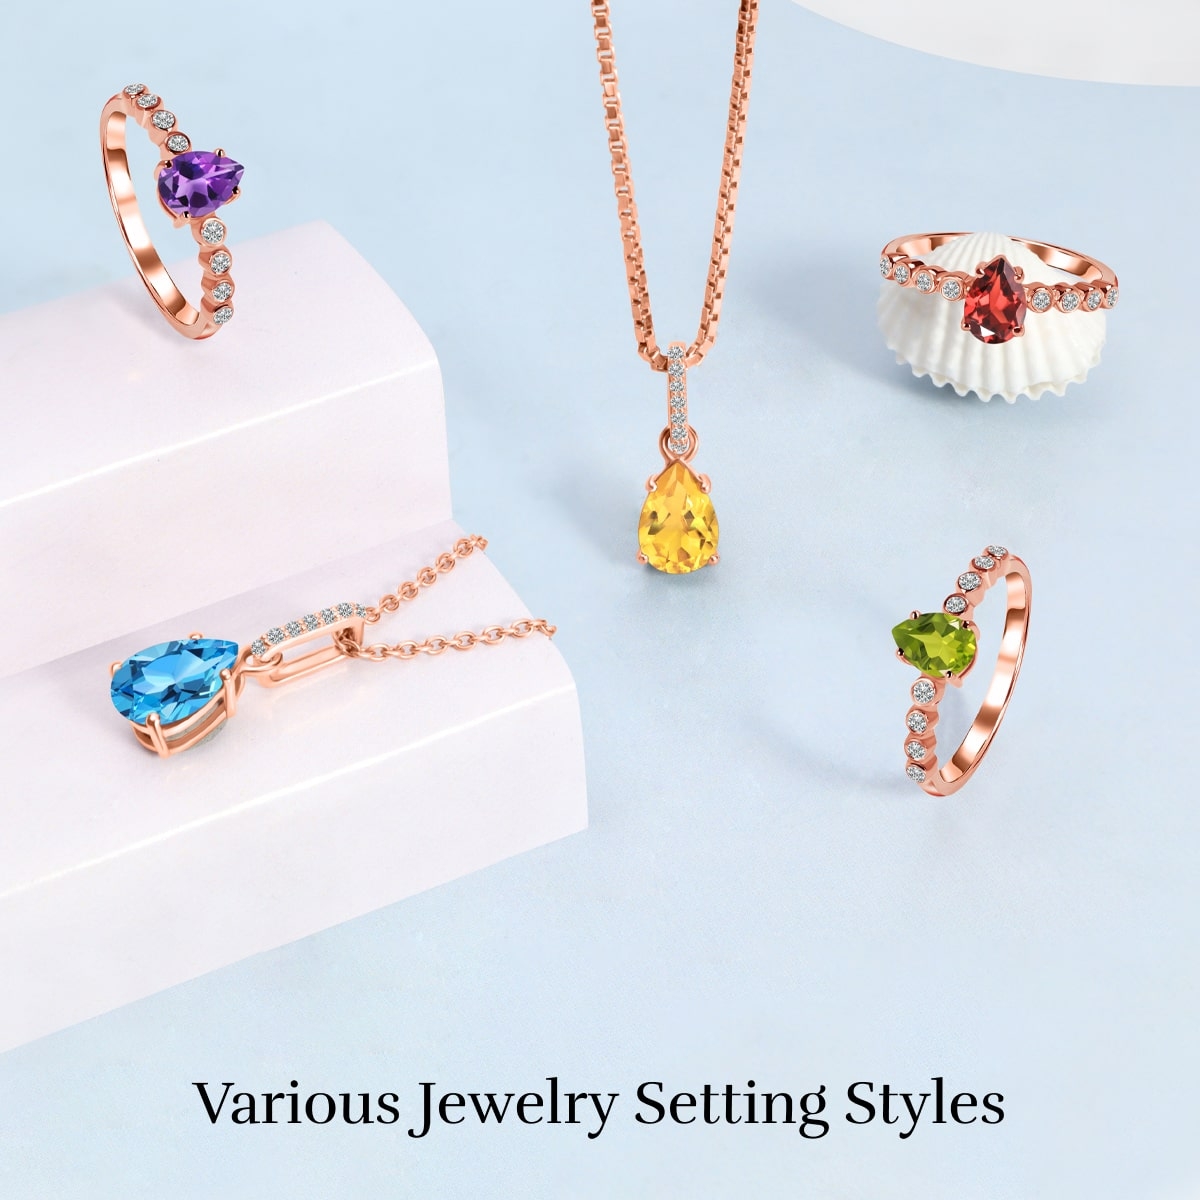 Different Types of Jewelry Setting